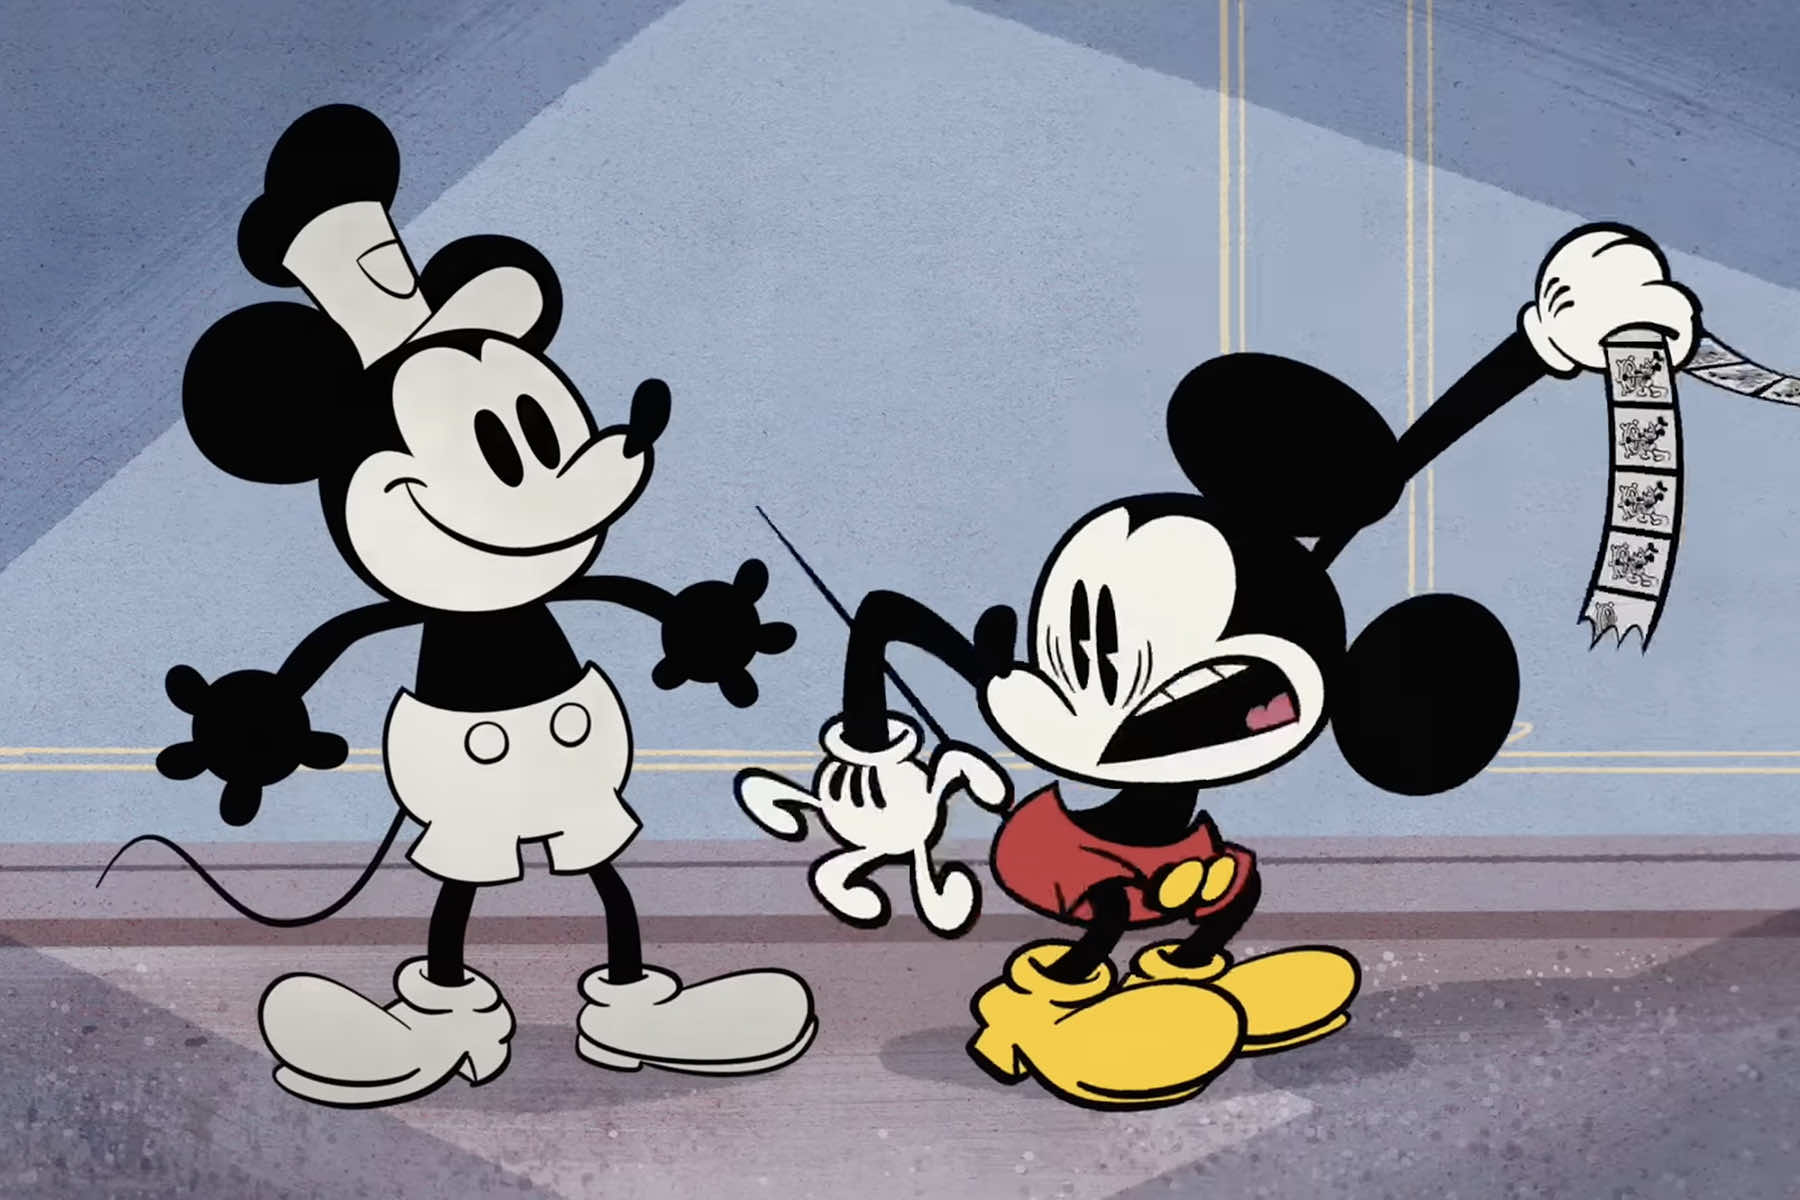 Steamboat Willie': An early version of Mickey Mouse is now in the public  domain